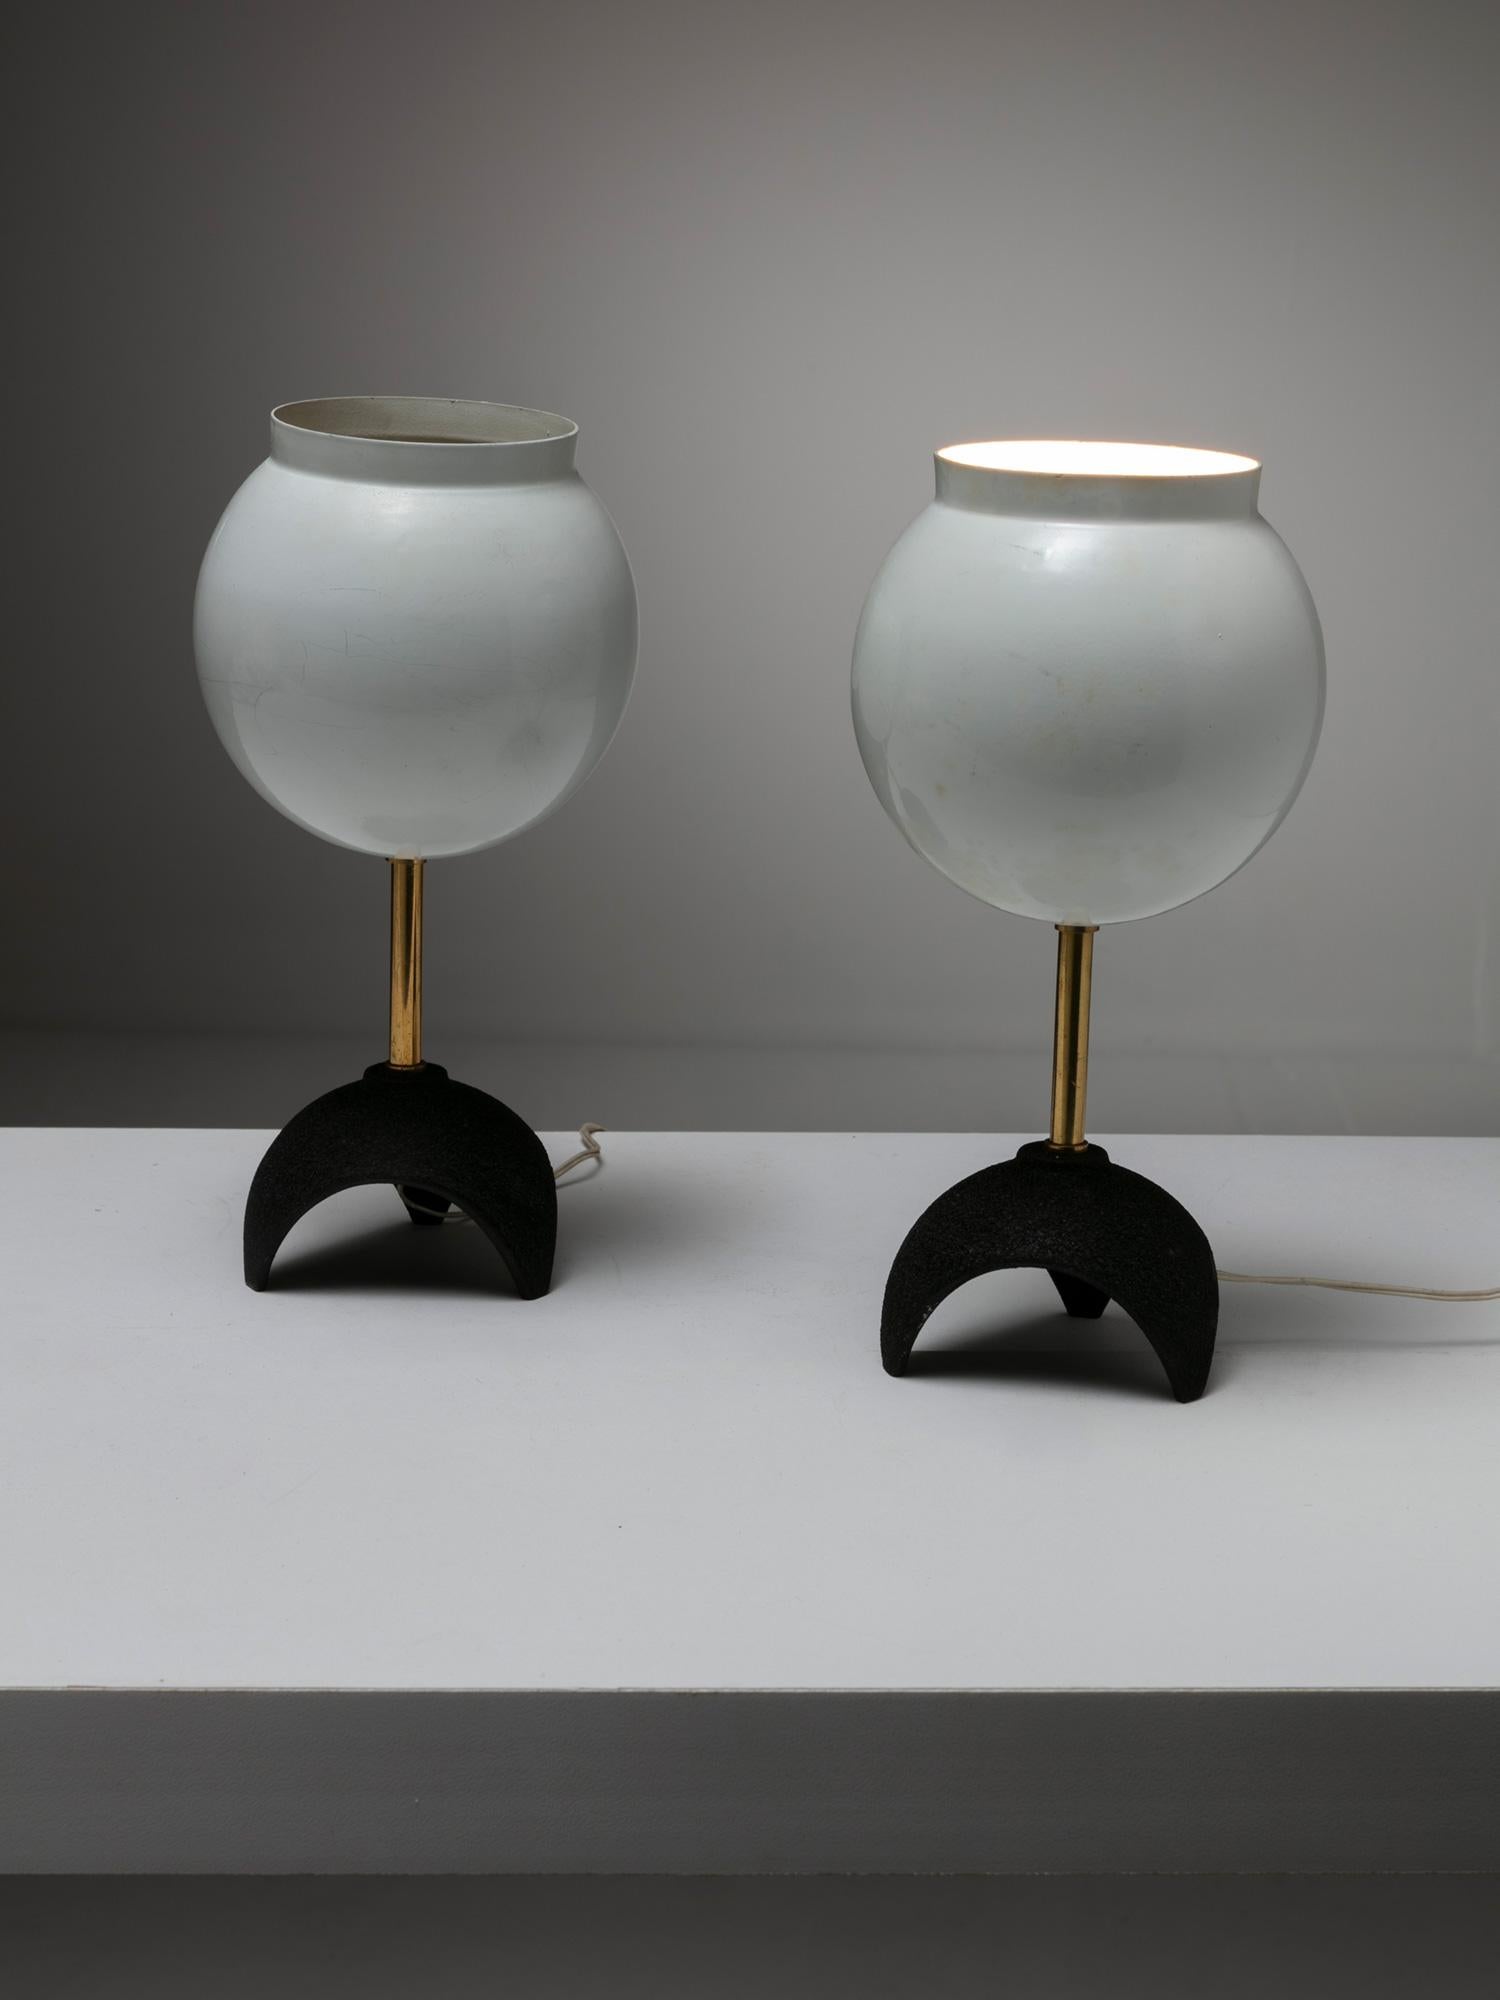 Tiny flower shaped table lamps.
White lacquered shade and brass details